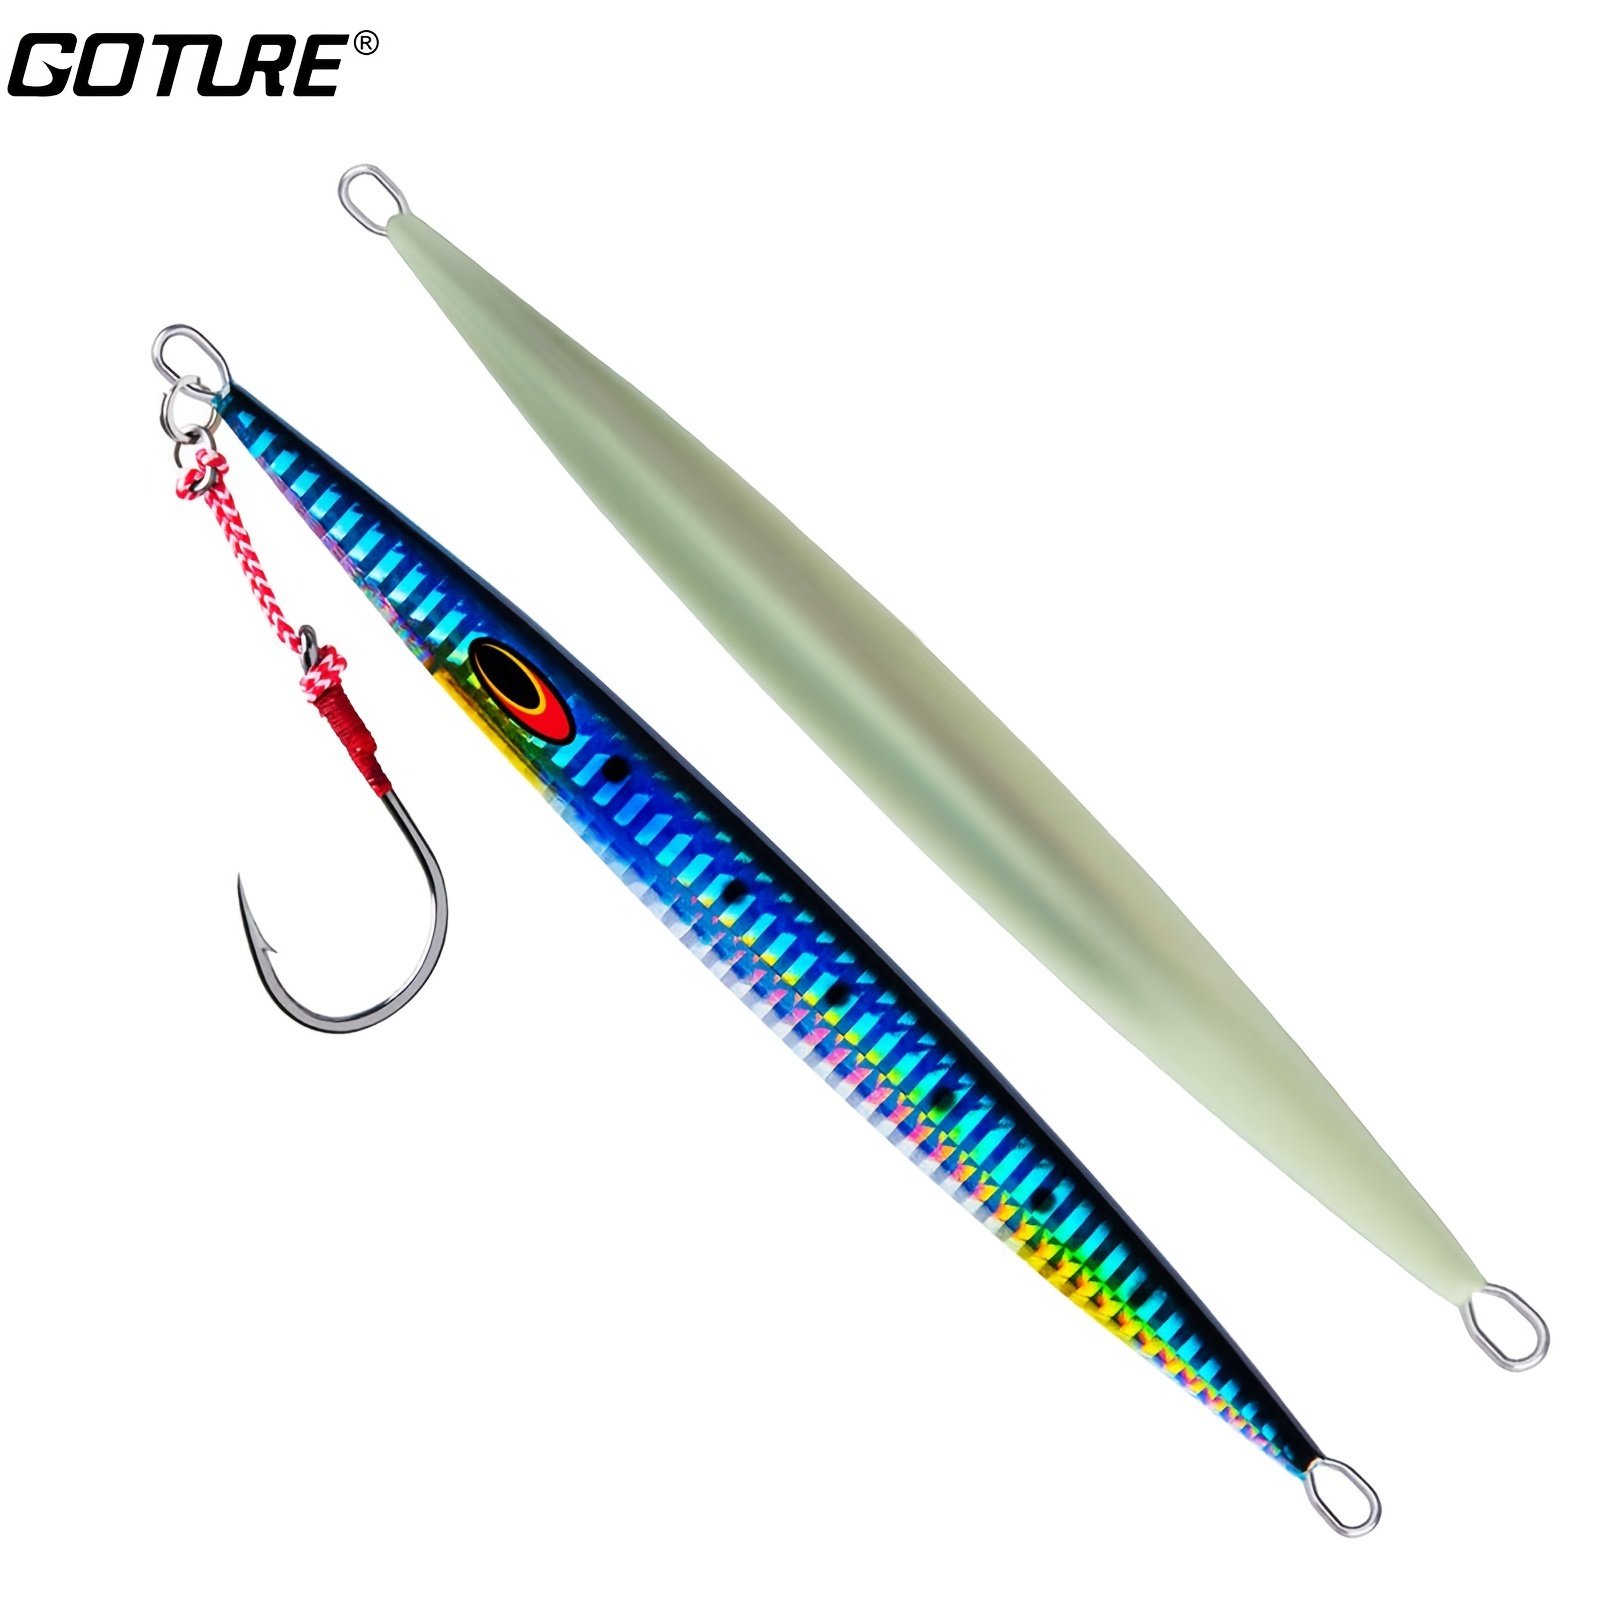 Goture 1pc Pink Fishing Jig Vertical Saltwater Jigs Glow Lead Jigs Deep Sea  Fishing Lures Slow Jigging Pitching Artificial Lures for Tuna, Grouper,  Dogtooth, Bass, Salmon